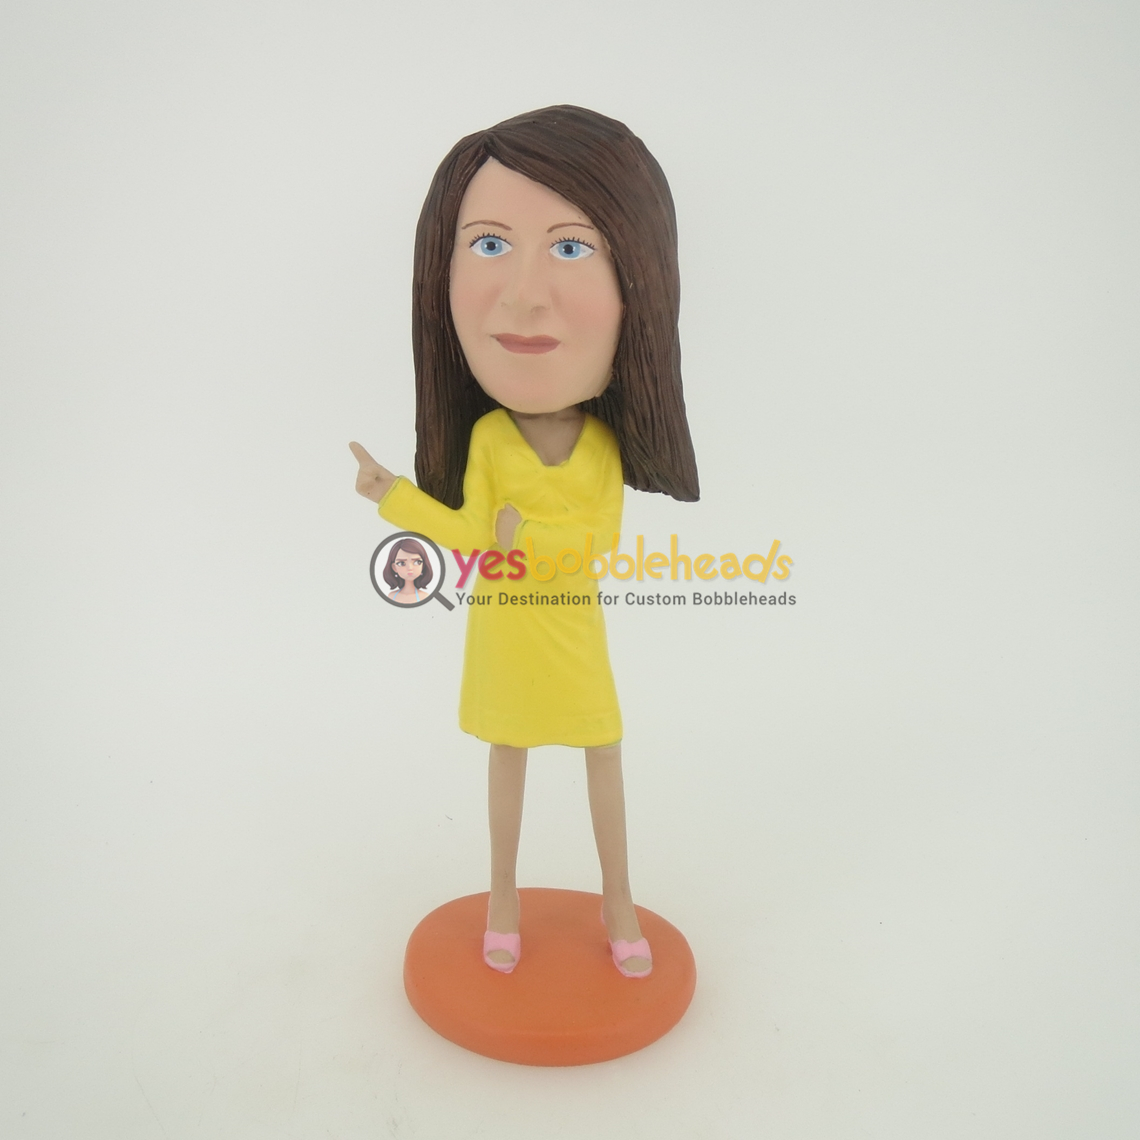 Picture of Custom Bobblehead Doll: Woman with Yellow Dress